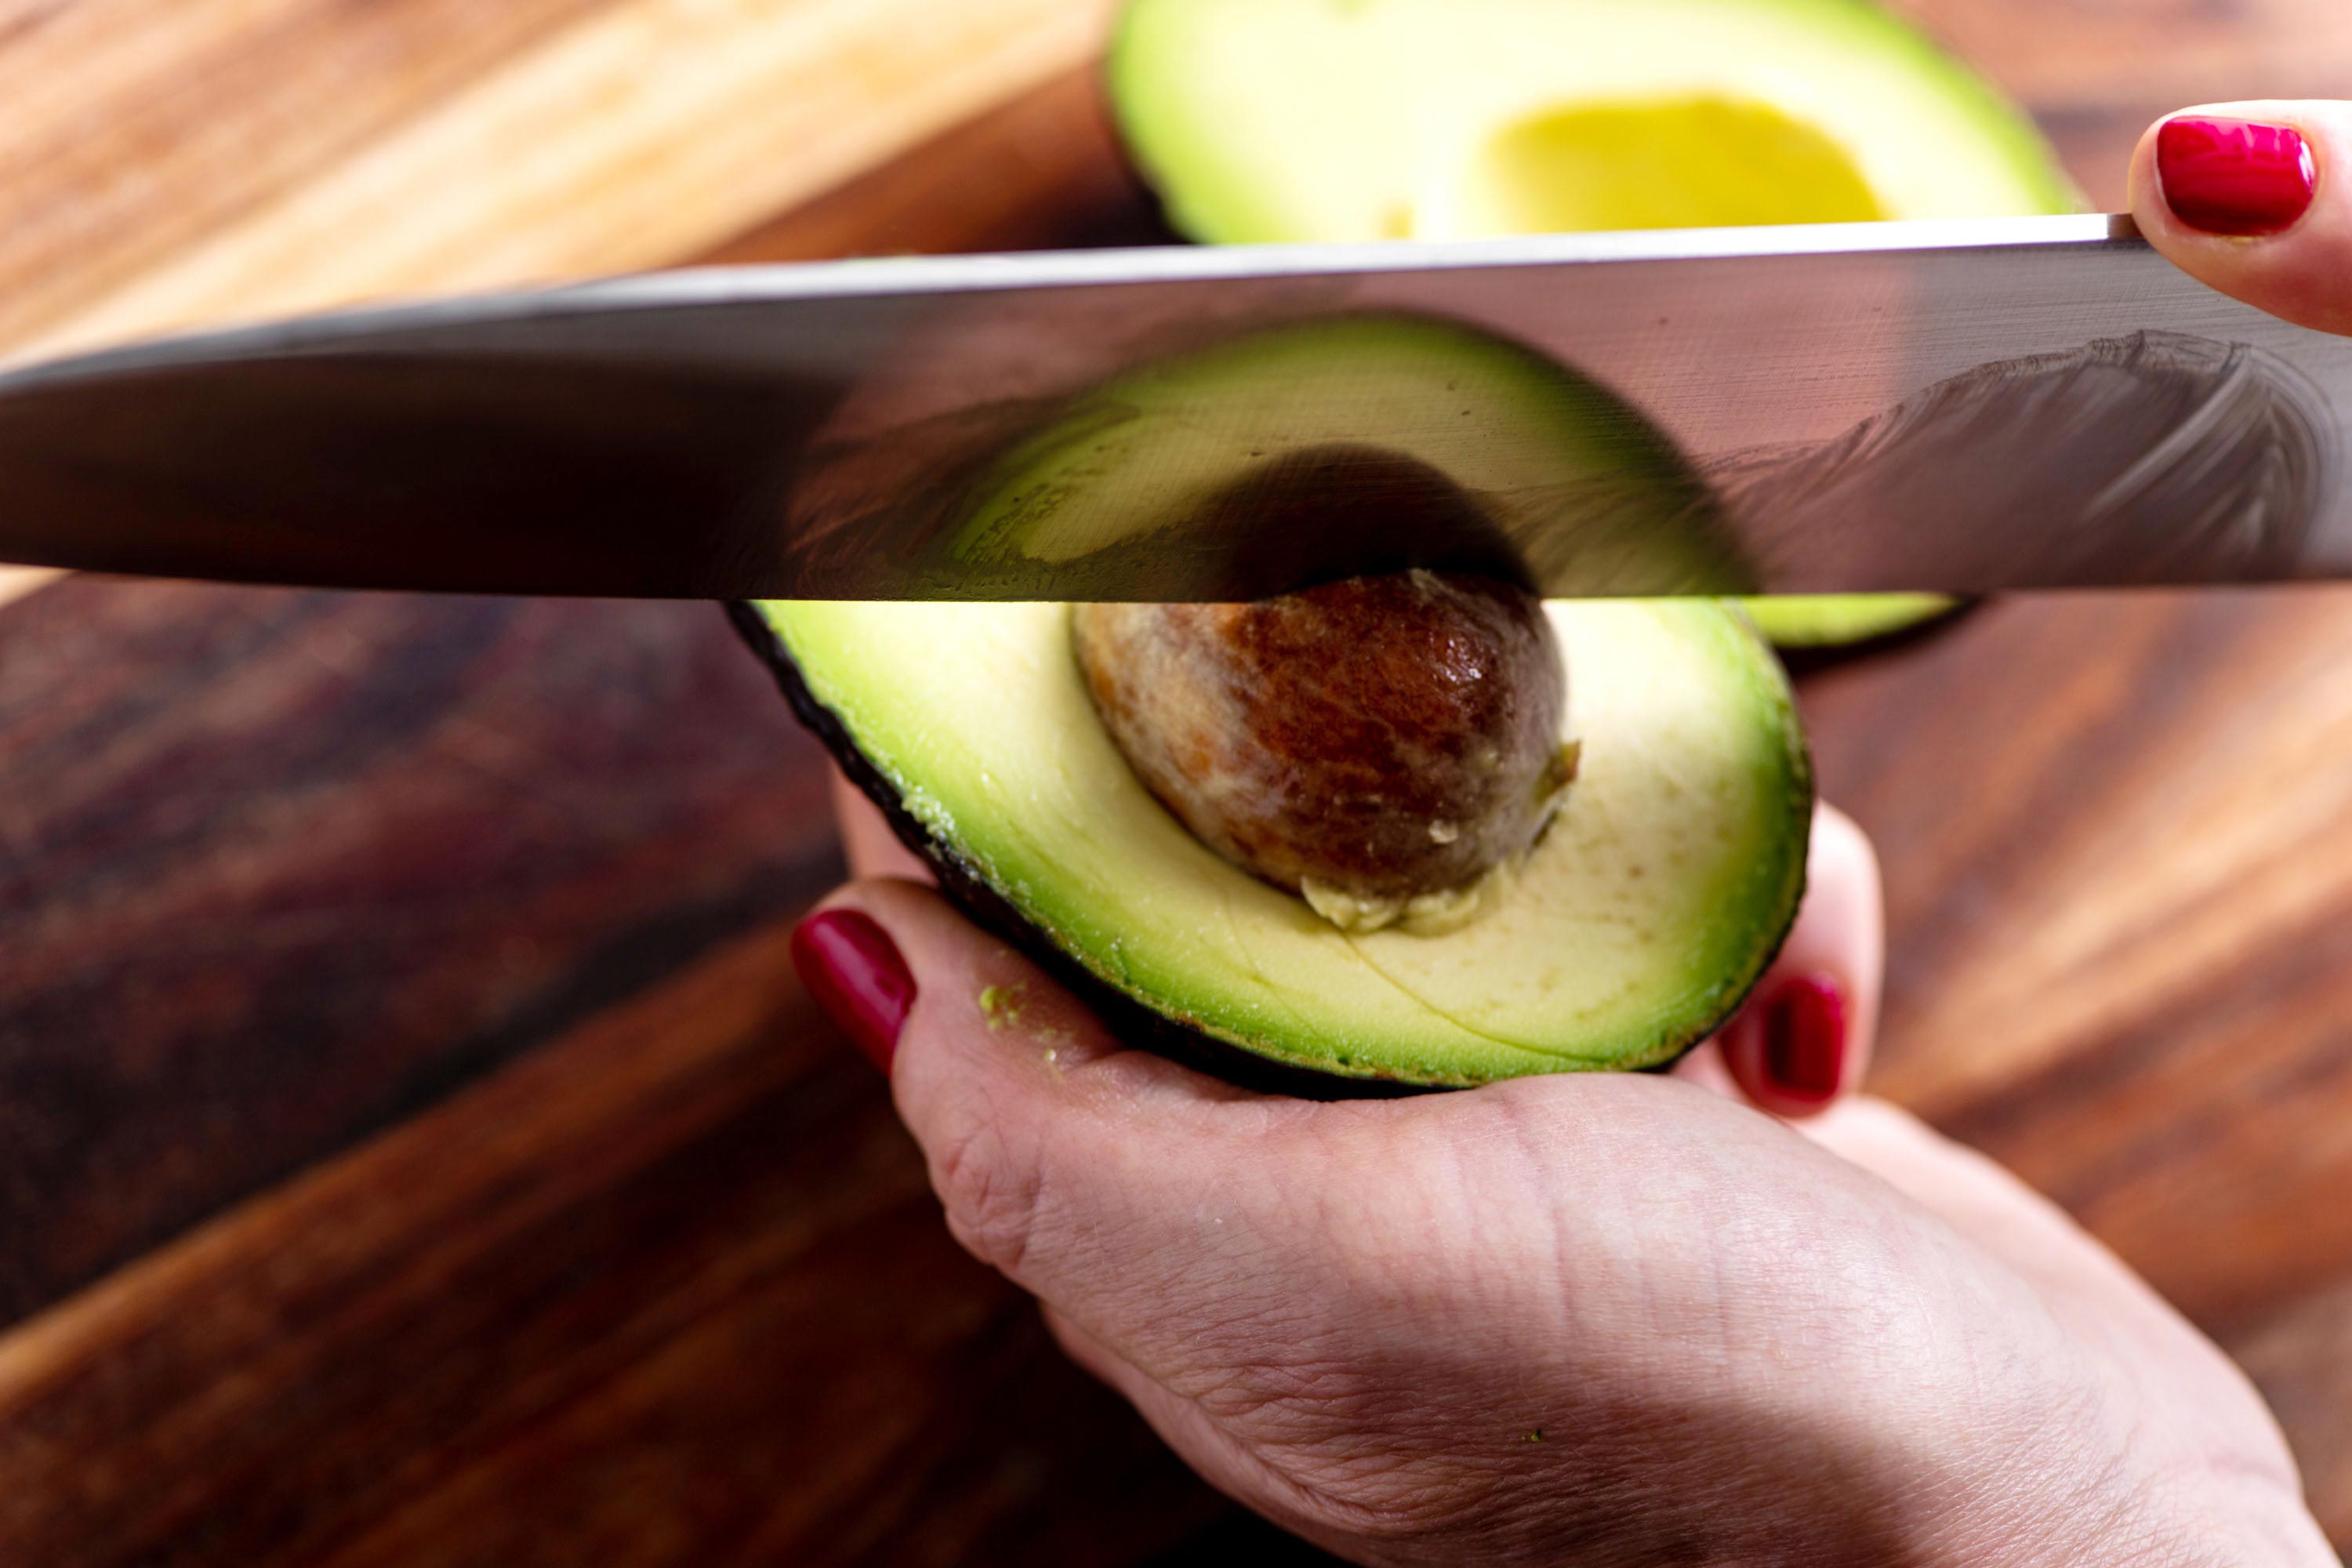 How to Cut Avocados